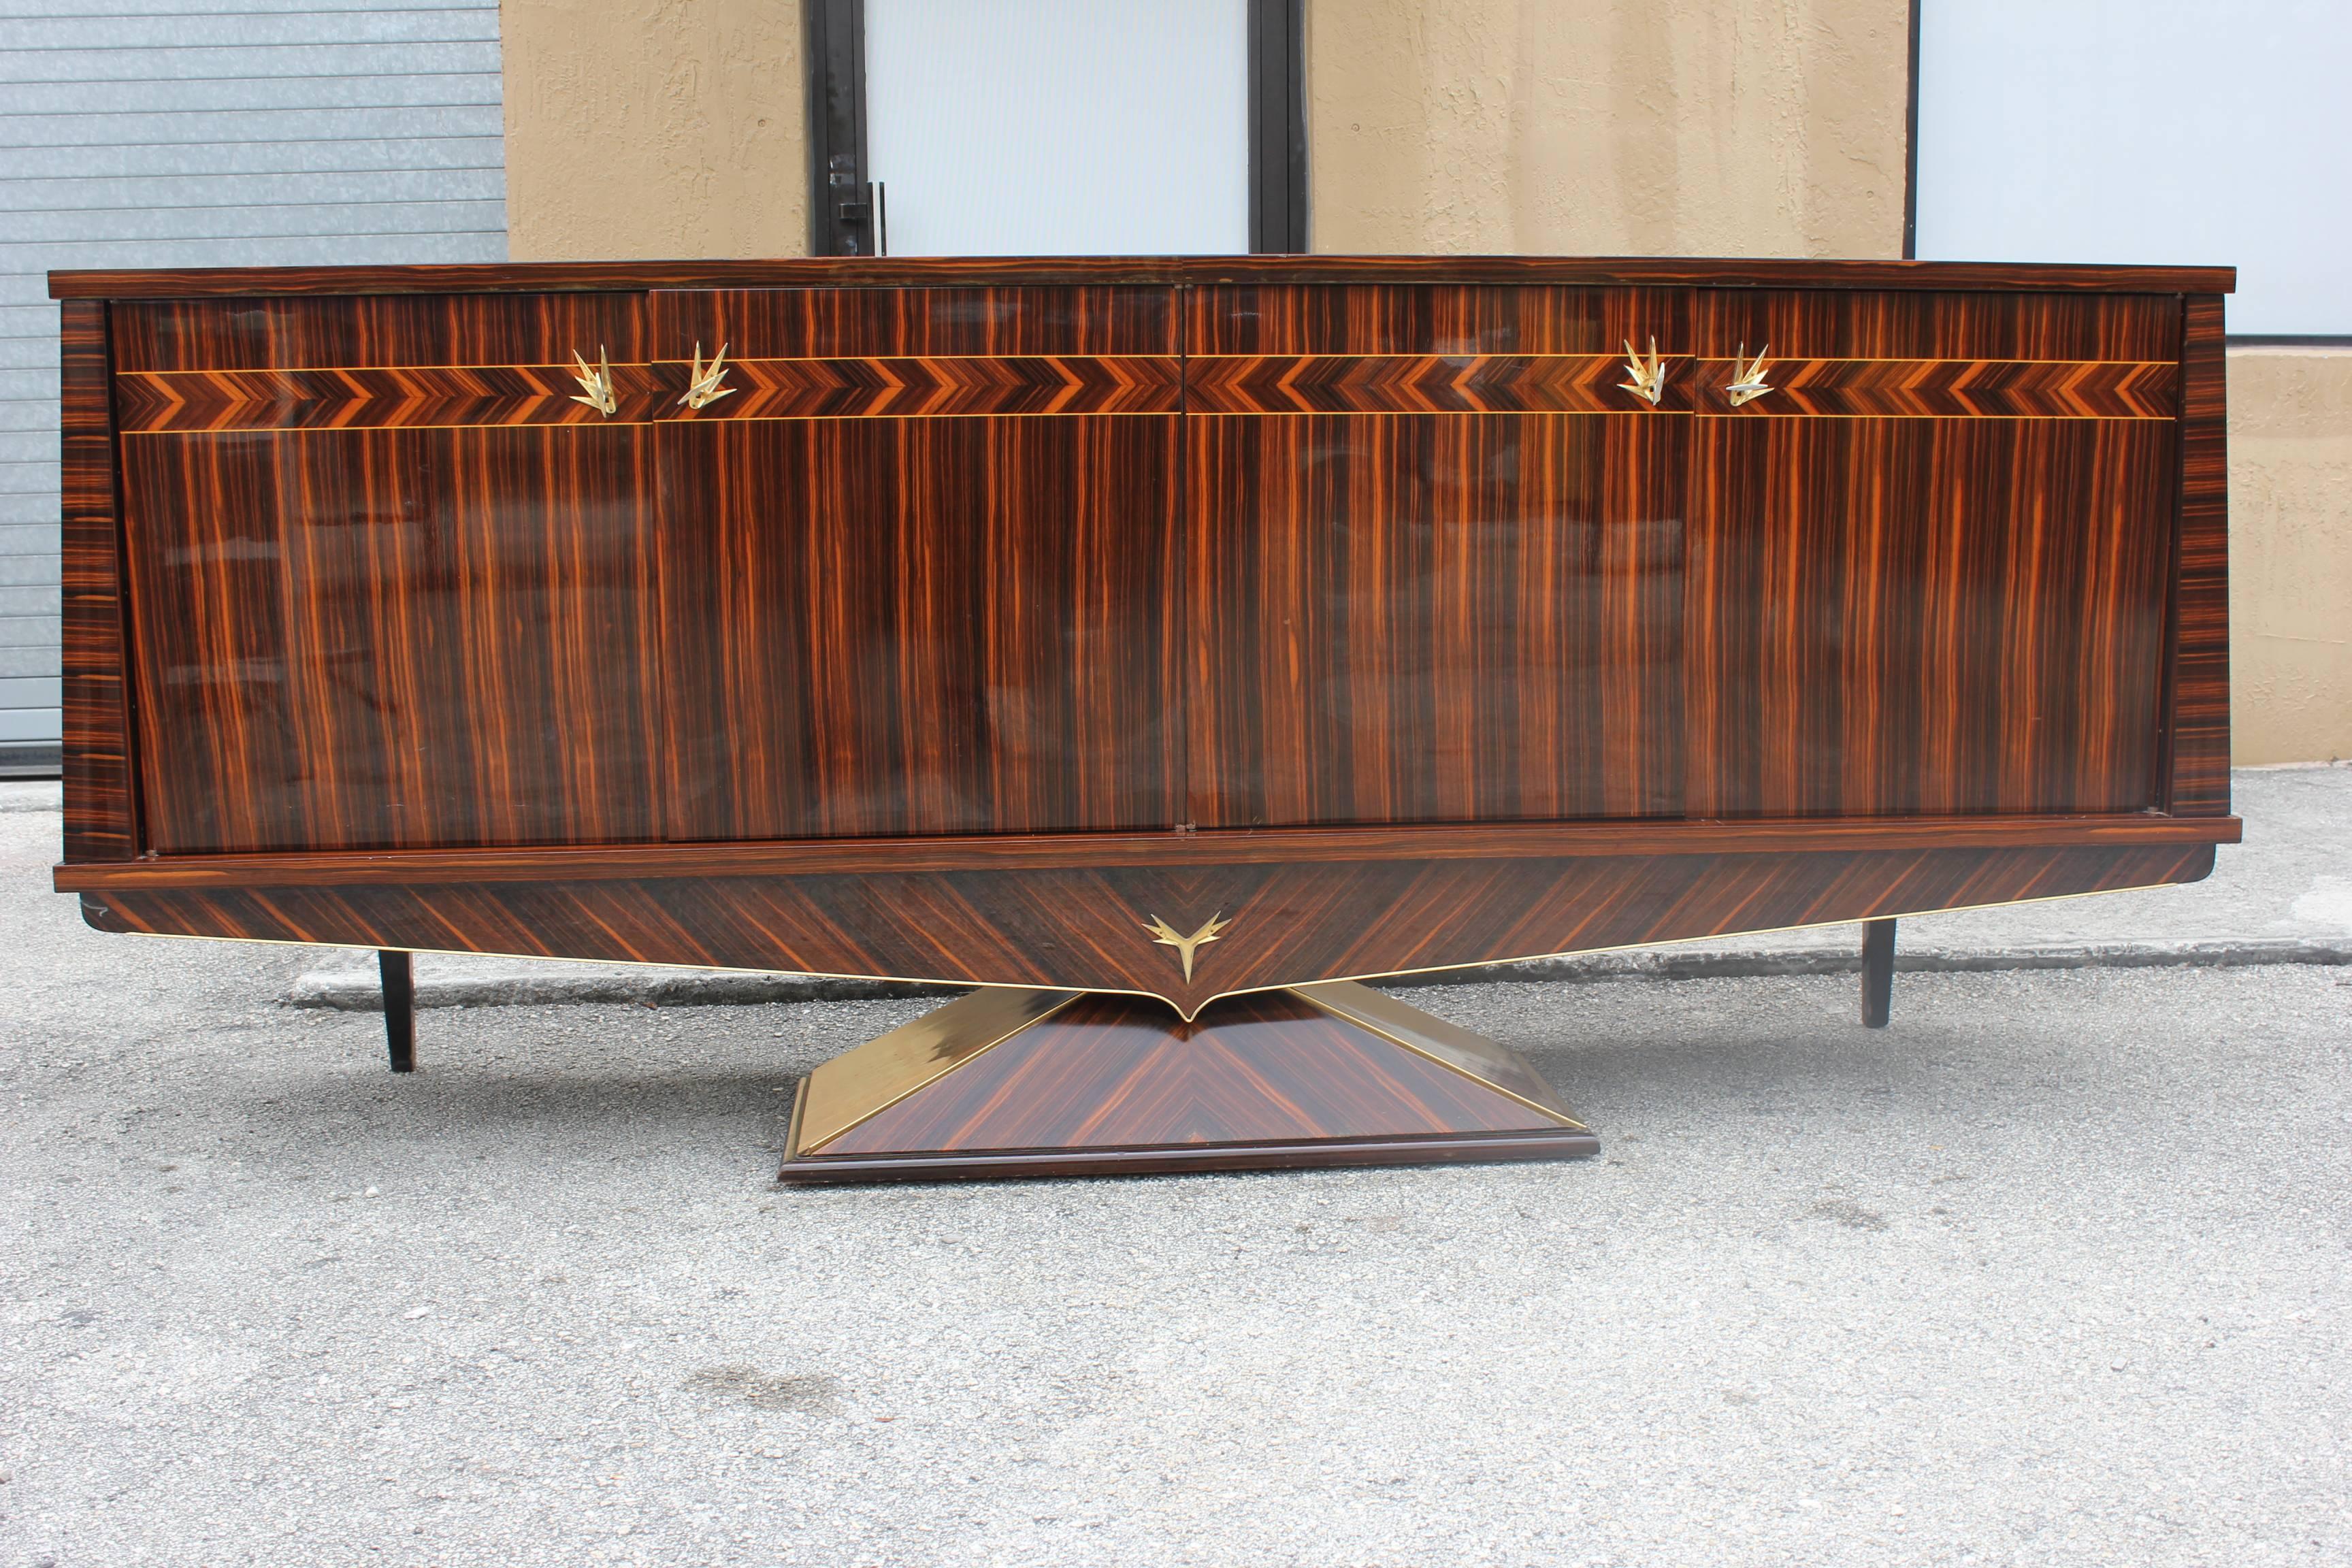 Beautiful French Art Deco Macassar ebony sideboard or buffet, circa 1940s. Very nice wood design, the sideboard is in very good condition. The piece features with 4 adjustable shelves you can remove all the shelves if you need more space. The